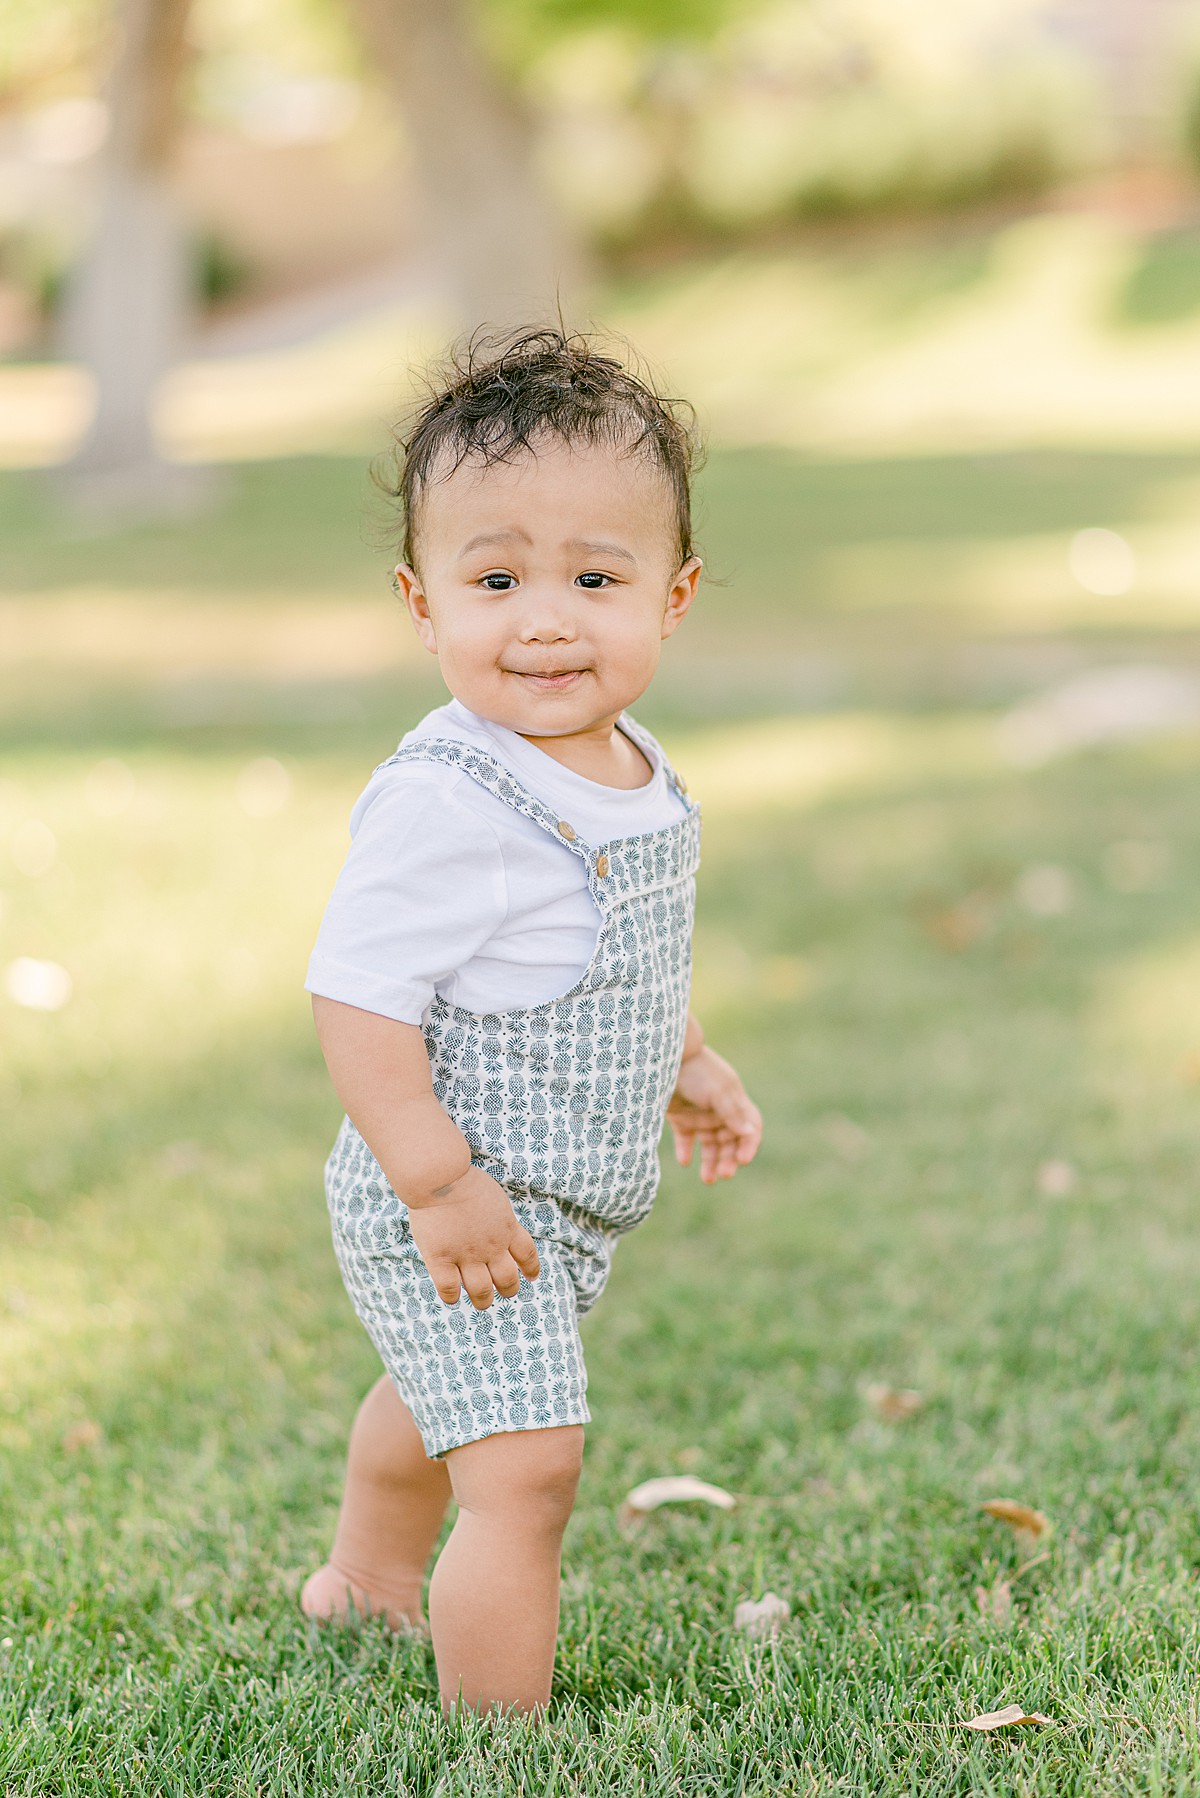 phoenix baby photographer capturing One year old boy wearing overalls and standing in grass